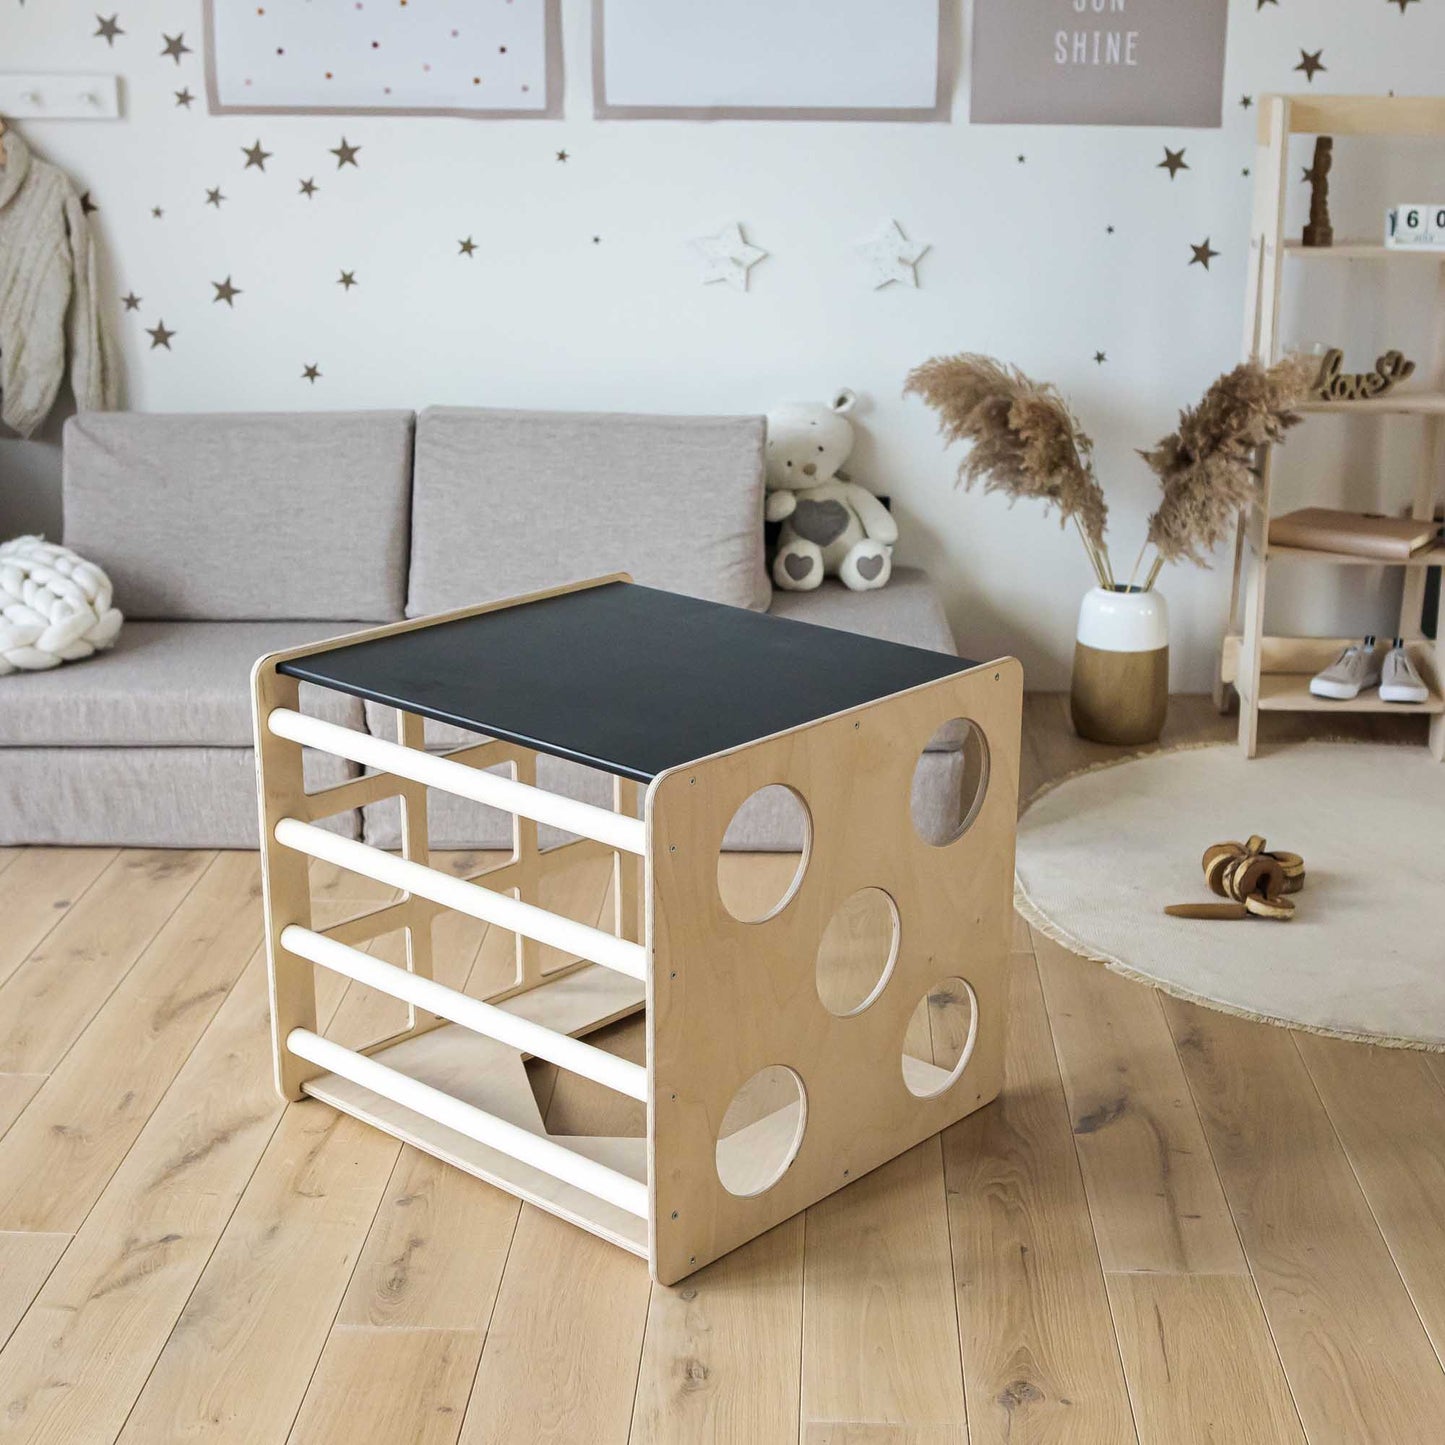 A Sweet Home From Wood activity cube with sensory panels and a ramp in a child's room.